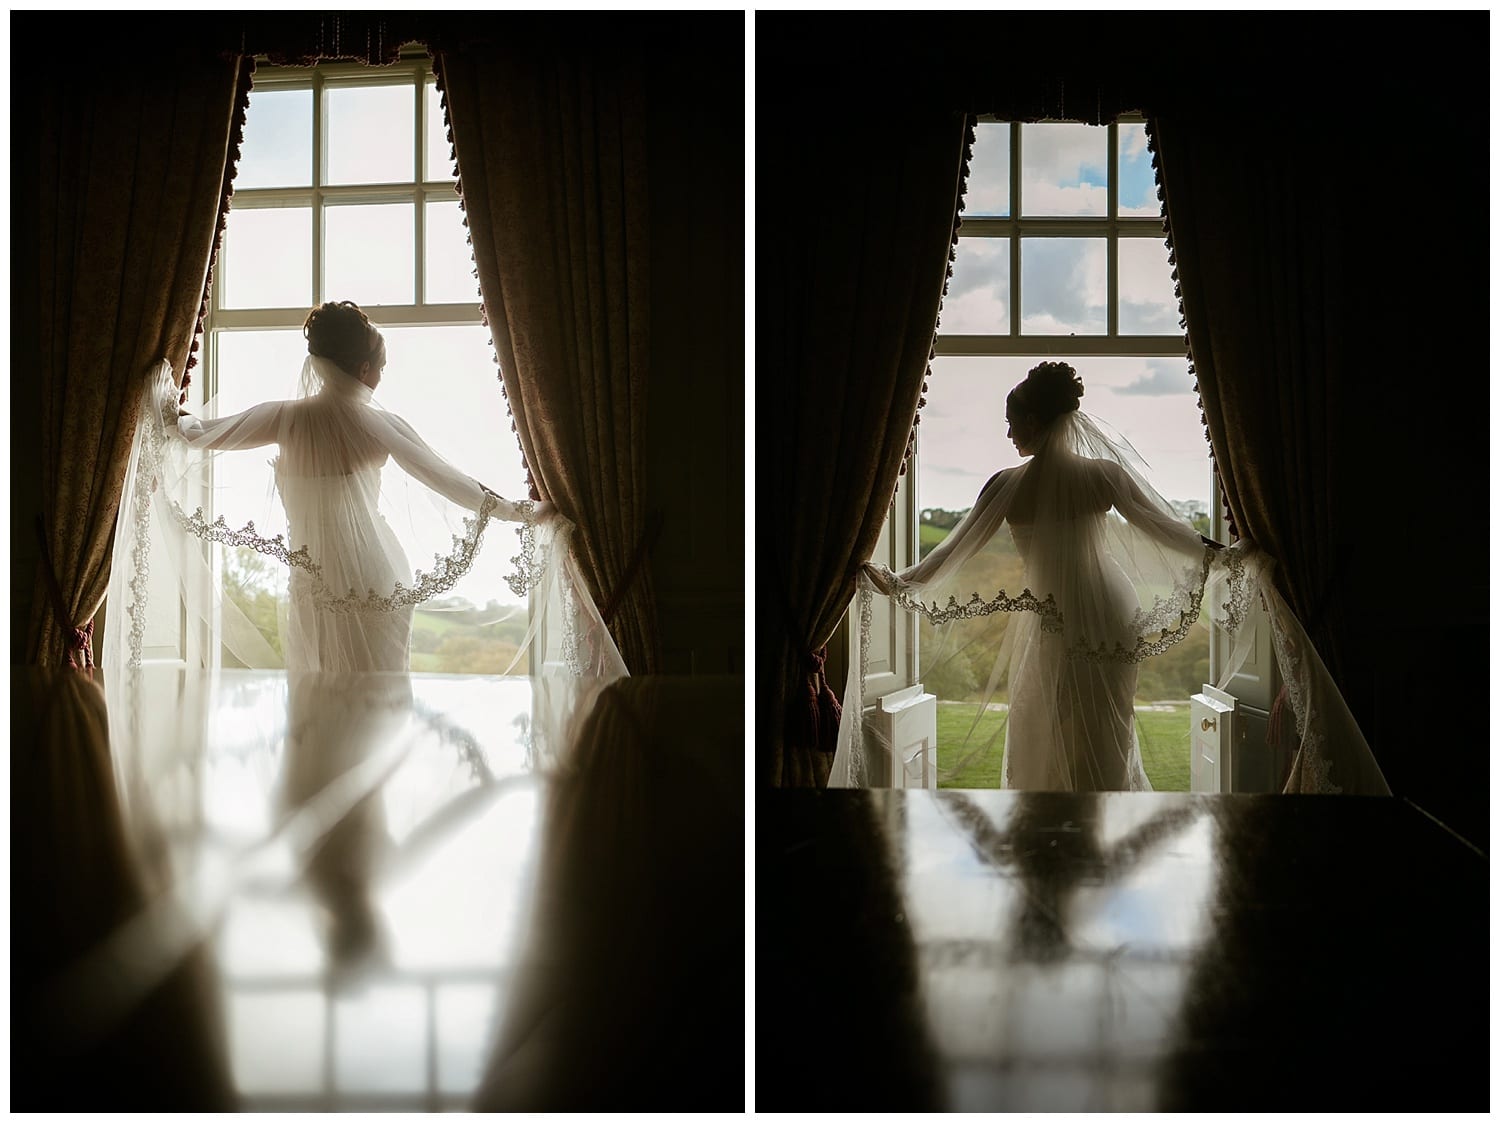 Shilstone House wedding by Younger photography